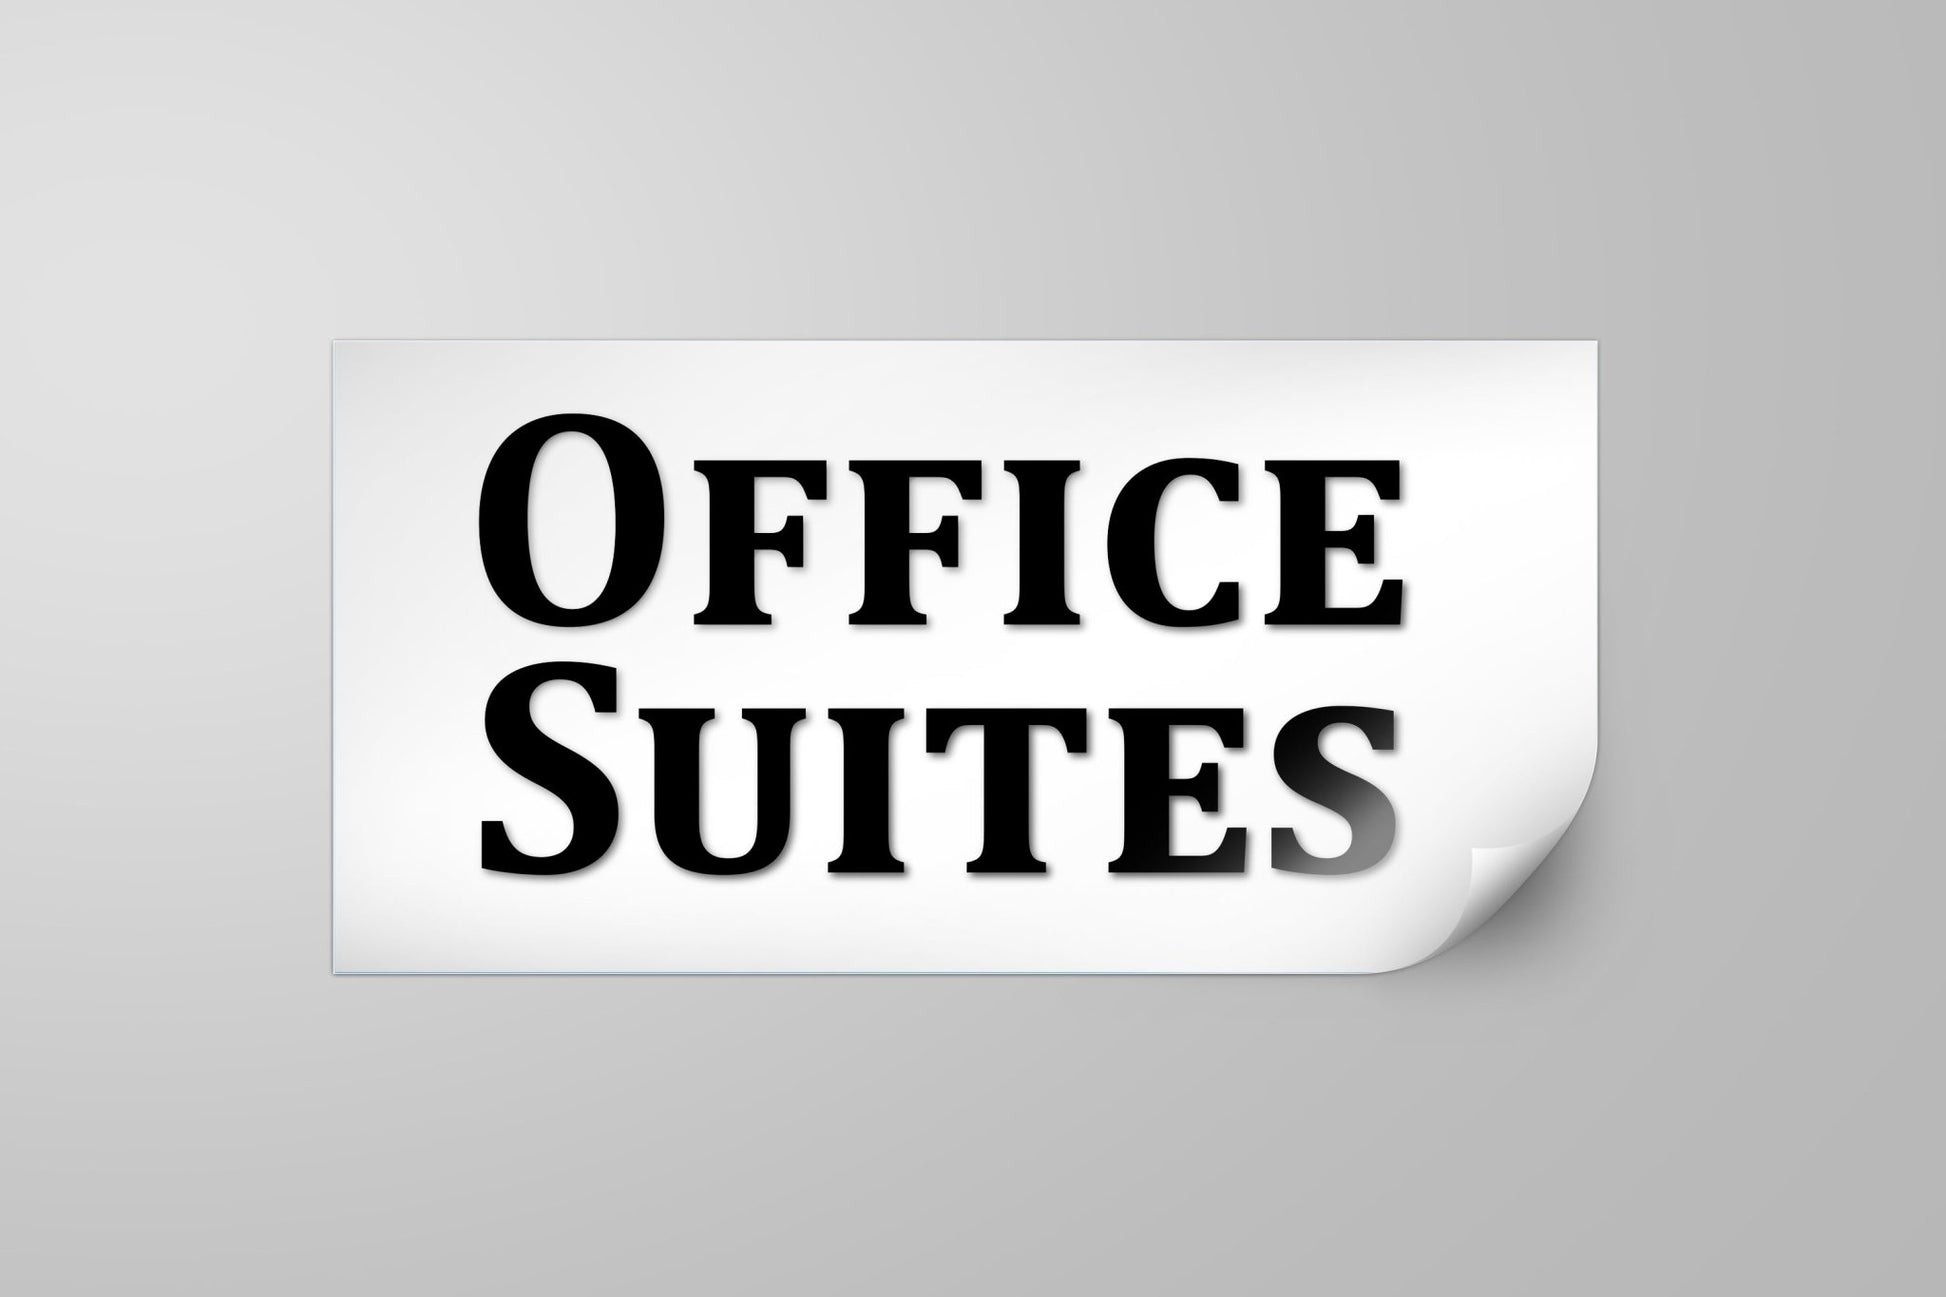 Office Suites Business Sign Cover, Removable Sticker, 17.5"x8", Black and White